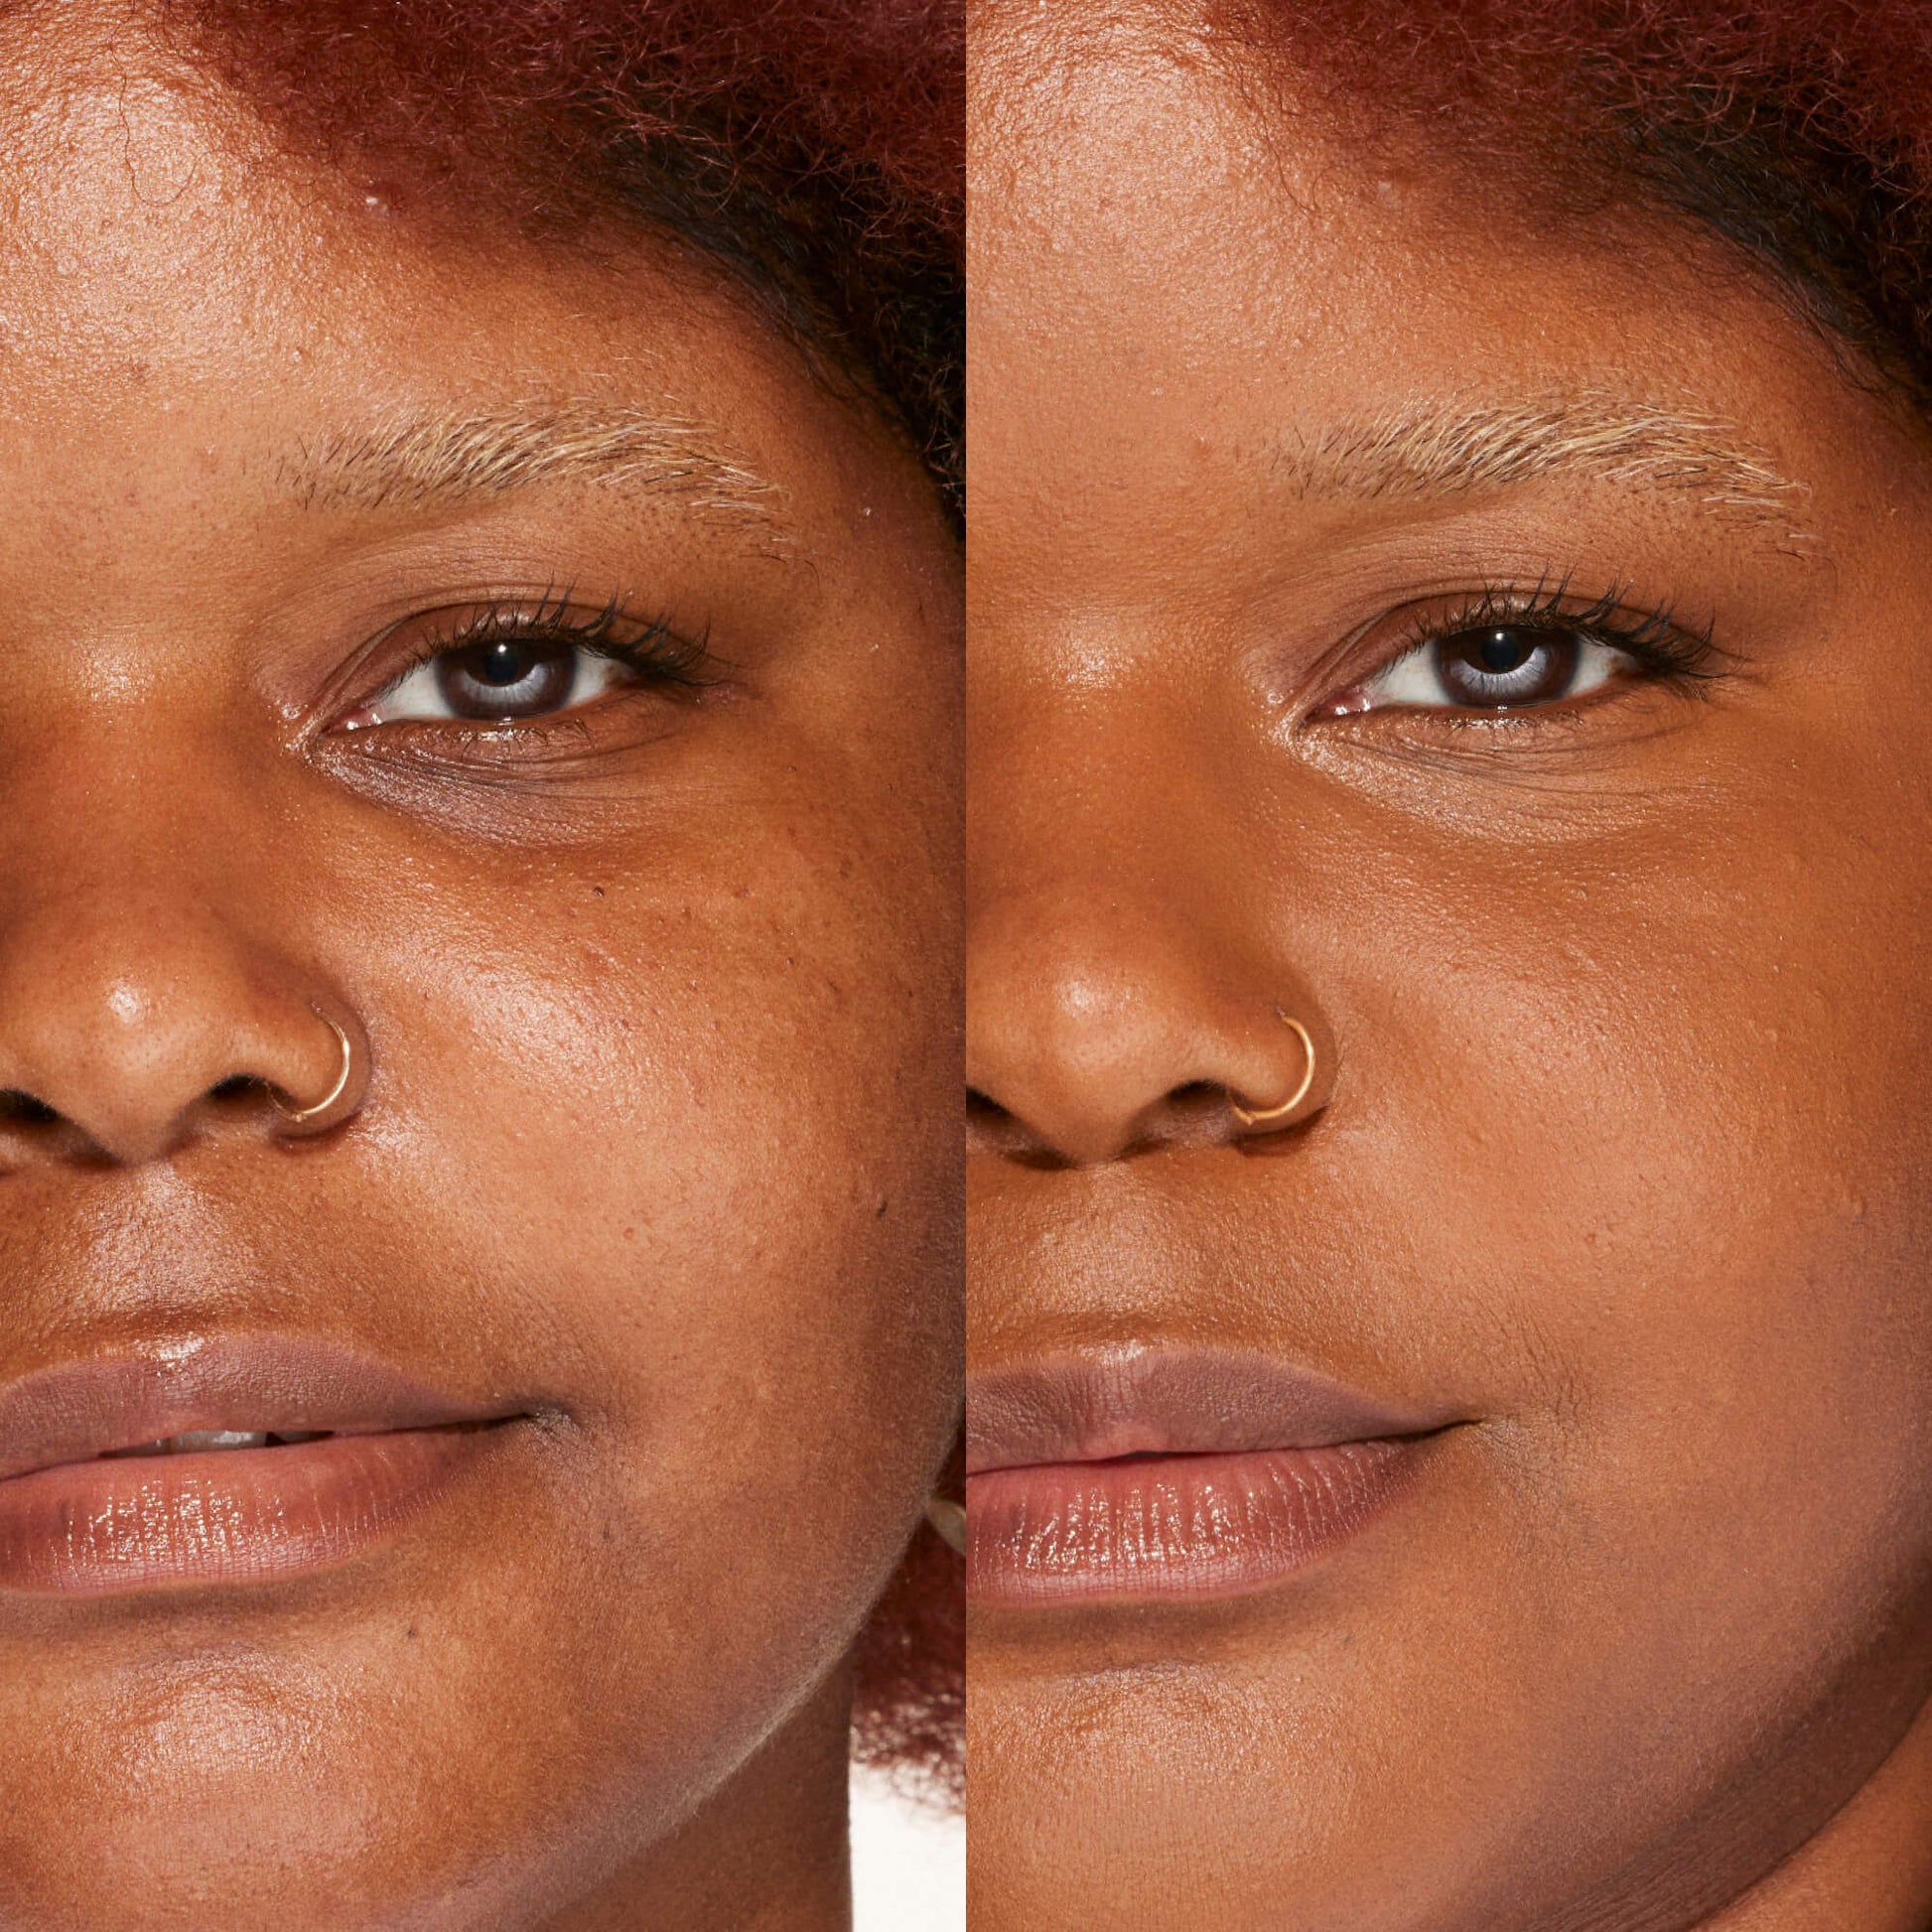 A person's face before and after using Tower 28 Beauty's Swipe Serum Concealer in shade 17.0 SD to cover up dark circles, blemishes, and discoloration